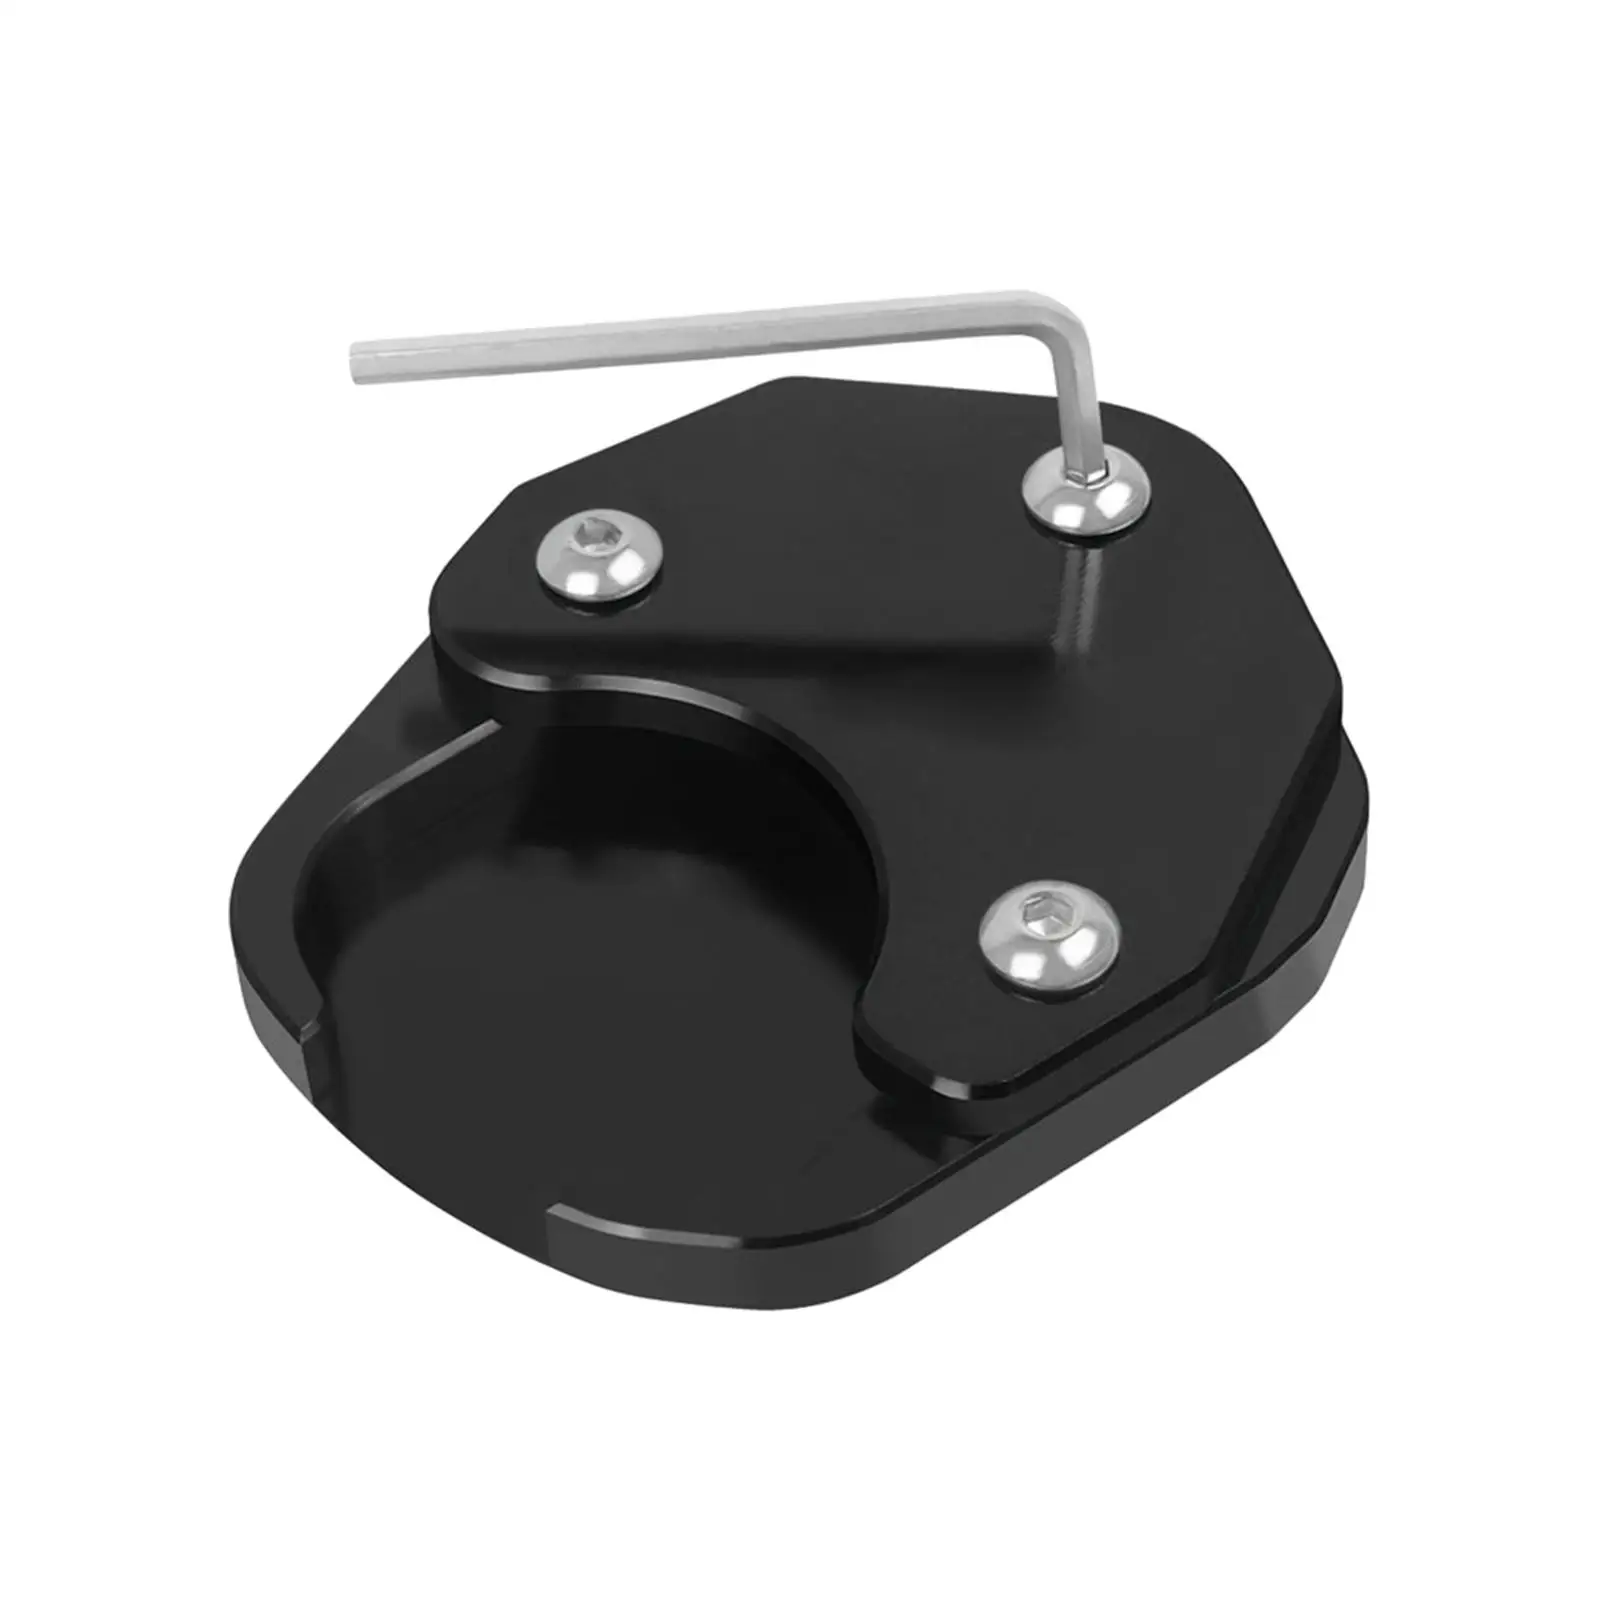 Motorcycle Side Stand Foot Enlarger Support Accessory, Replacement Grass Enlarger Extension Plate Foot Pad for Tiger 660